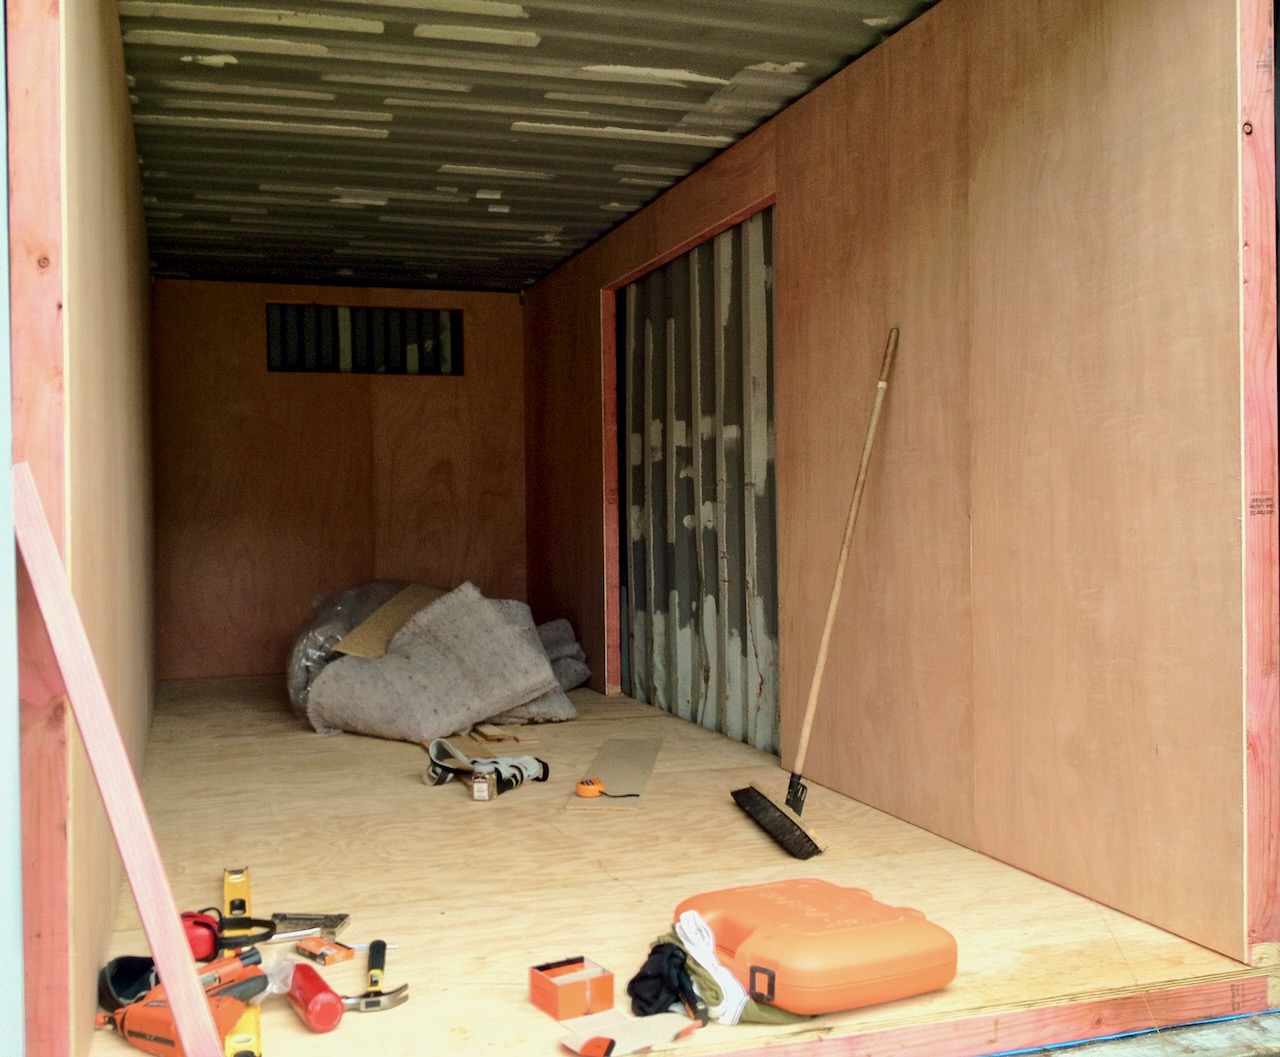 Building a Cabin from a Shipping Container